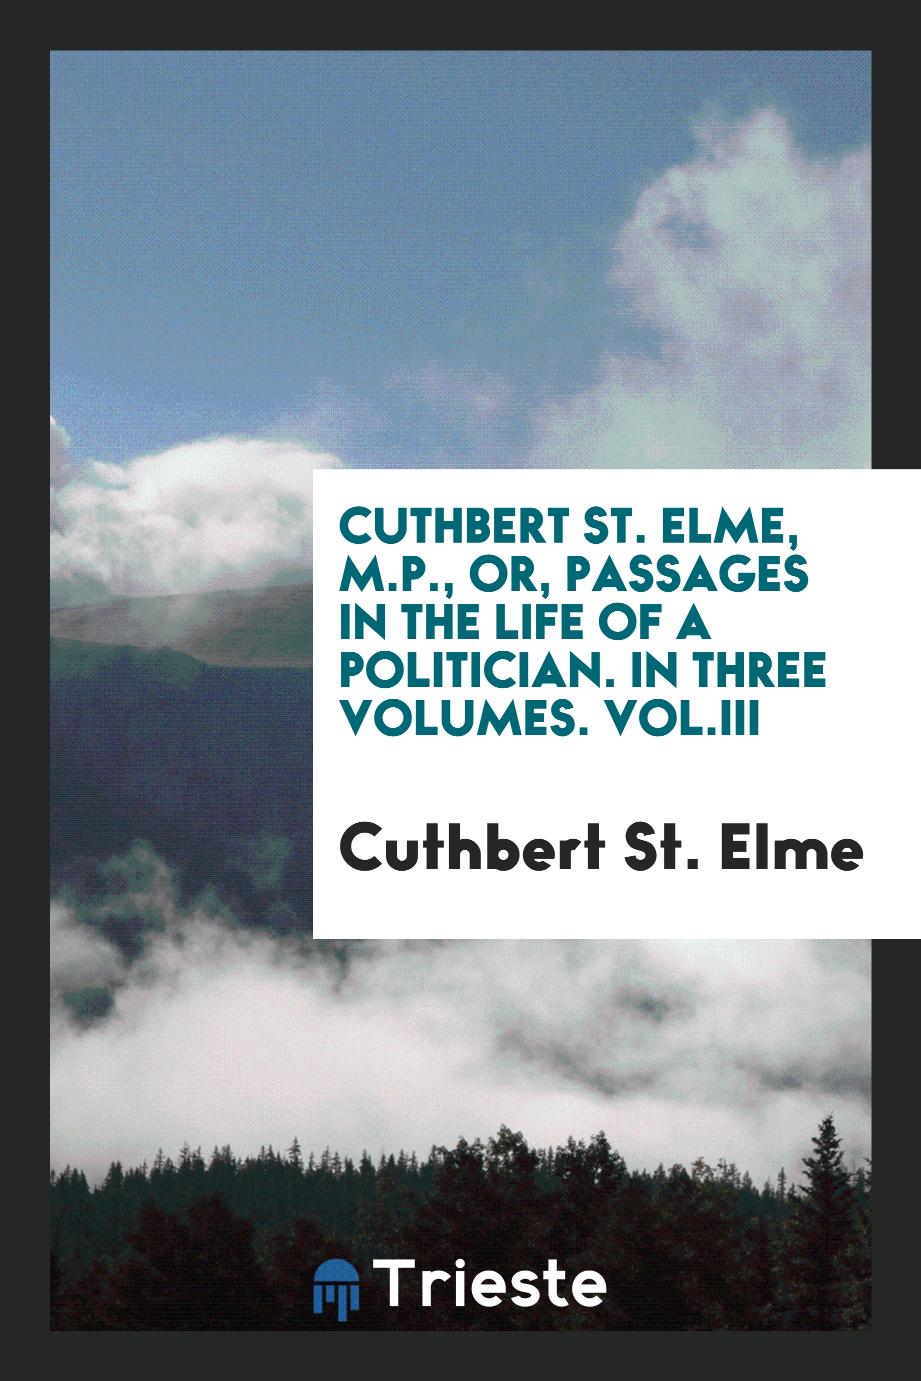 Cuthbert St. Elme, M.P., or, Passages in the life of a politician. In three volumes. Vol.III